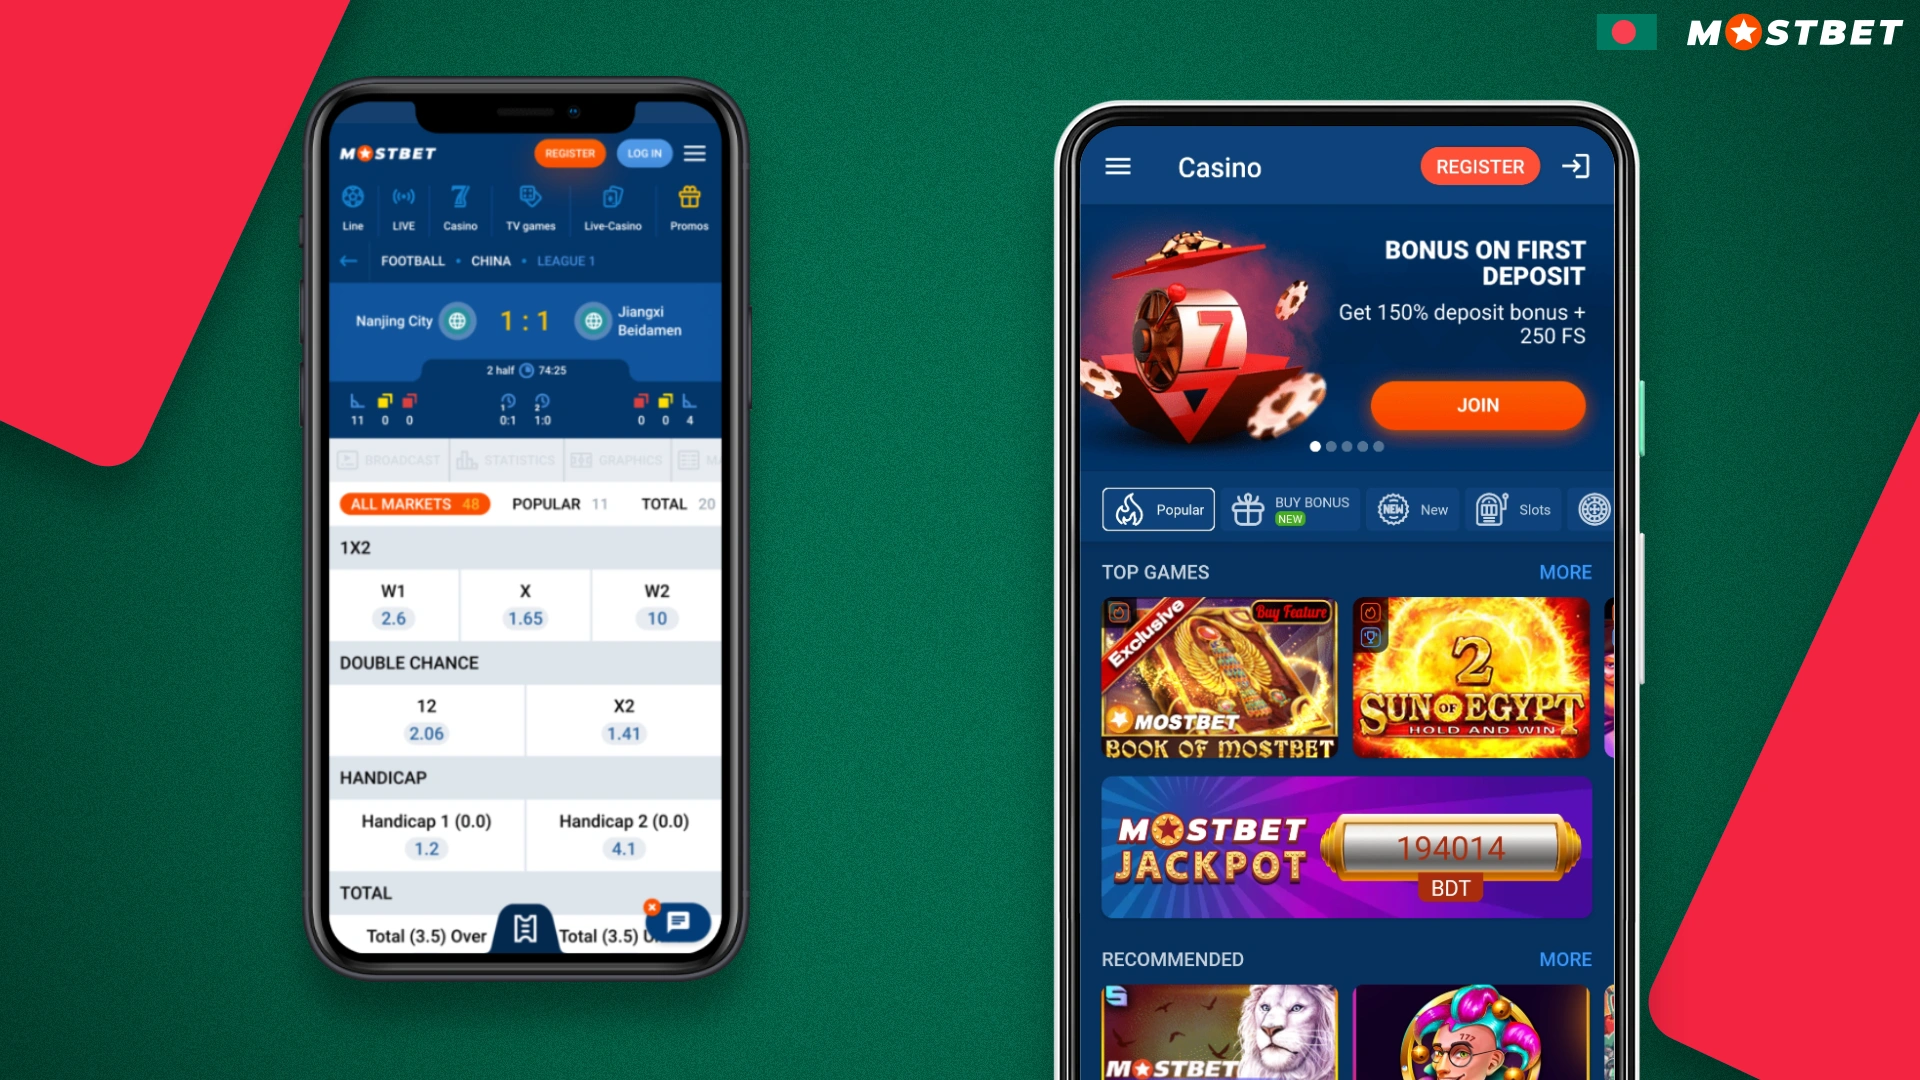 Mostbet mobile app for legal sports betting in Bangladesh